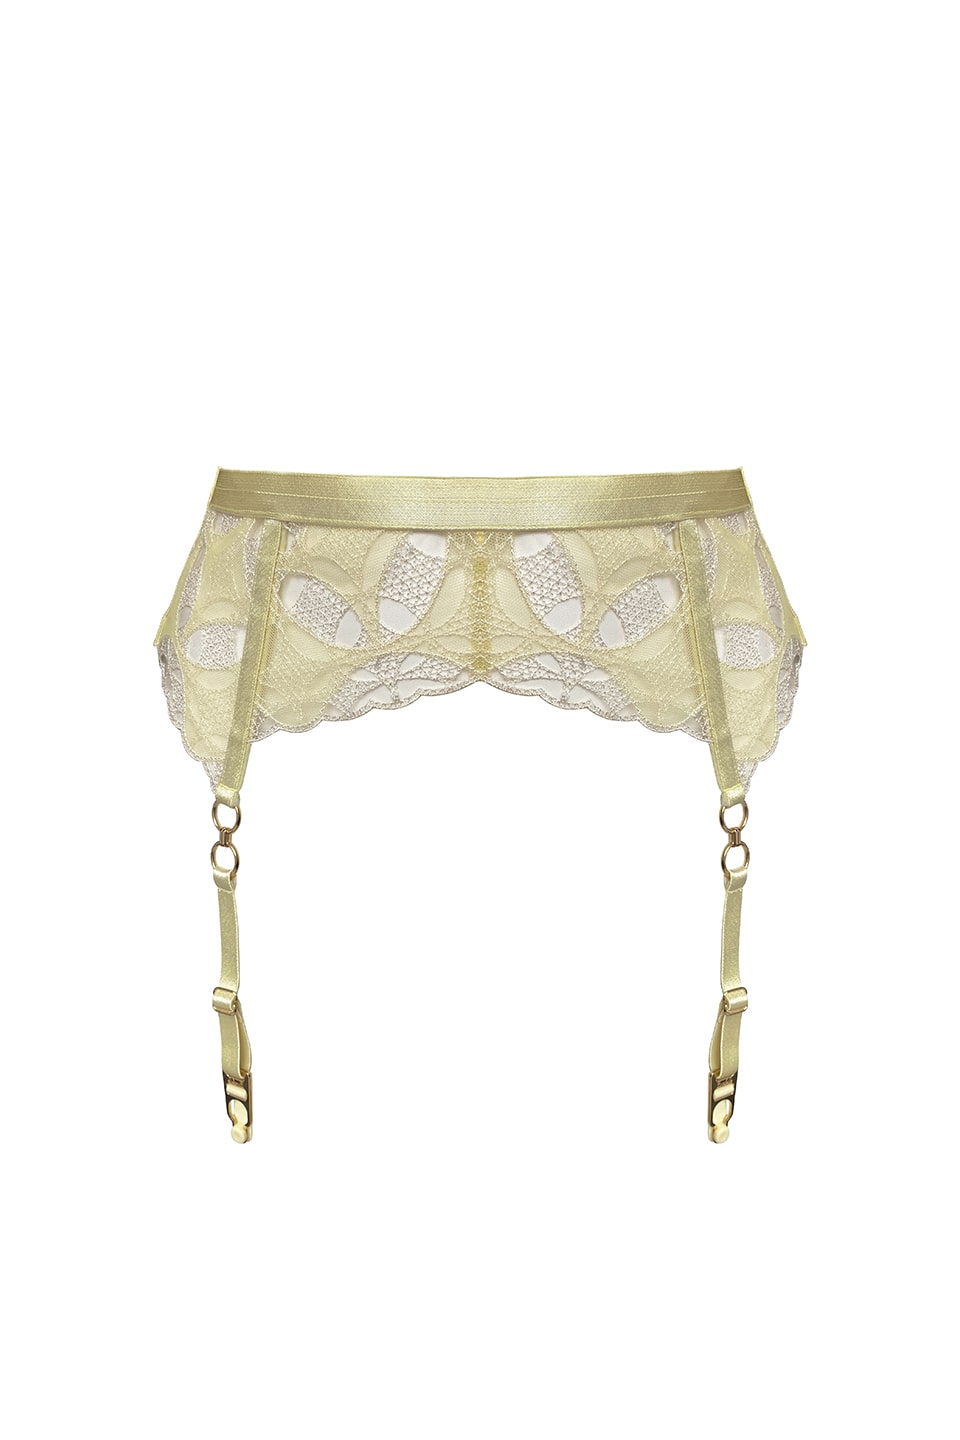 Shop online trendy Yellow Lingerie accessories from Atelier Bordelle Fashion designer. Product gallery 1